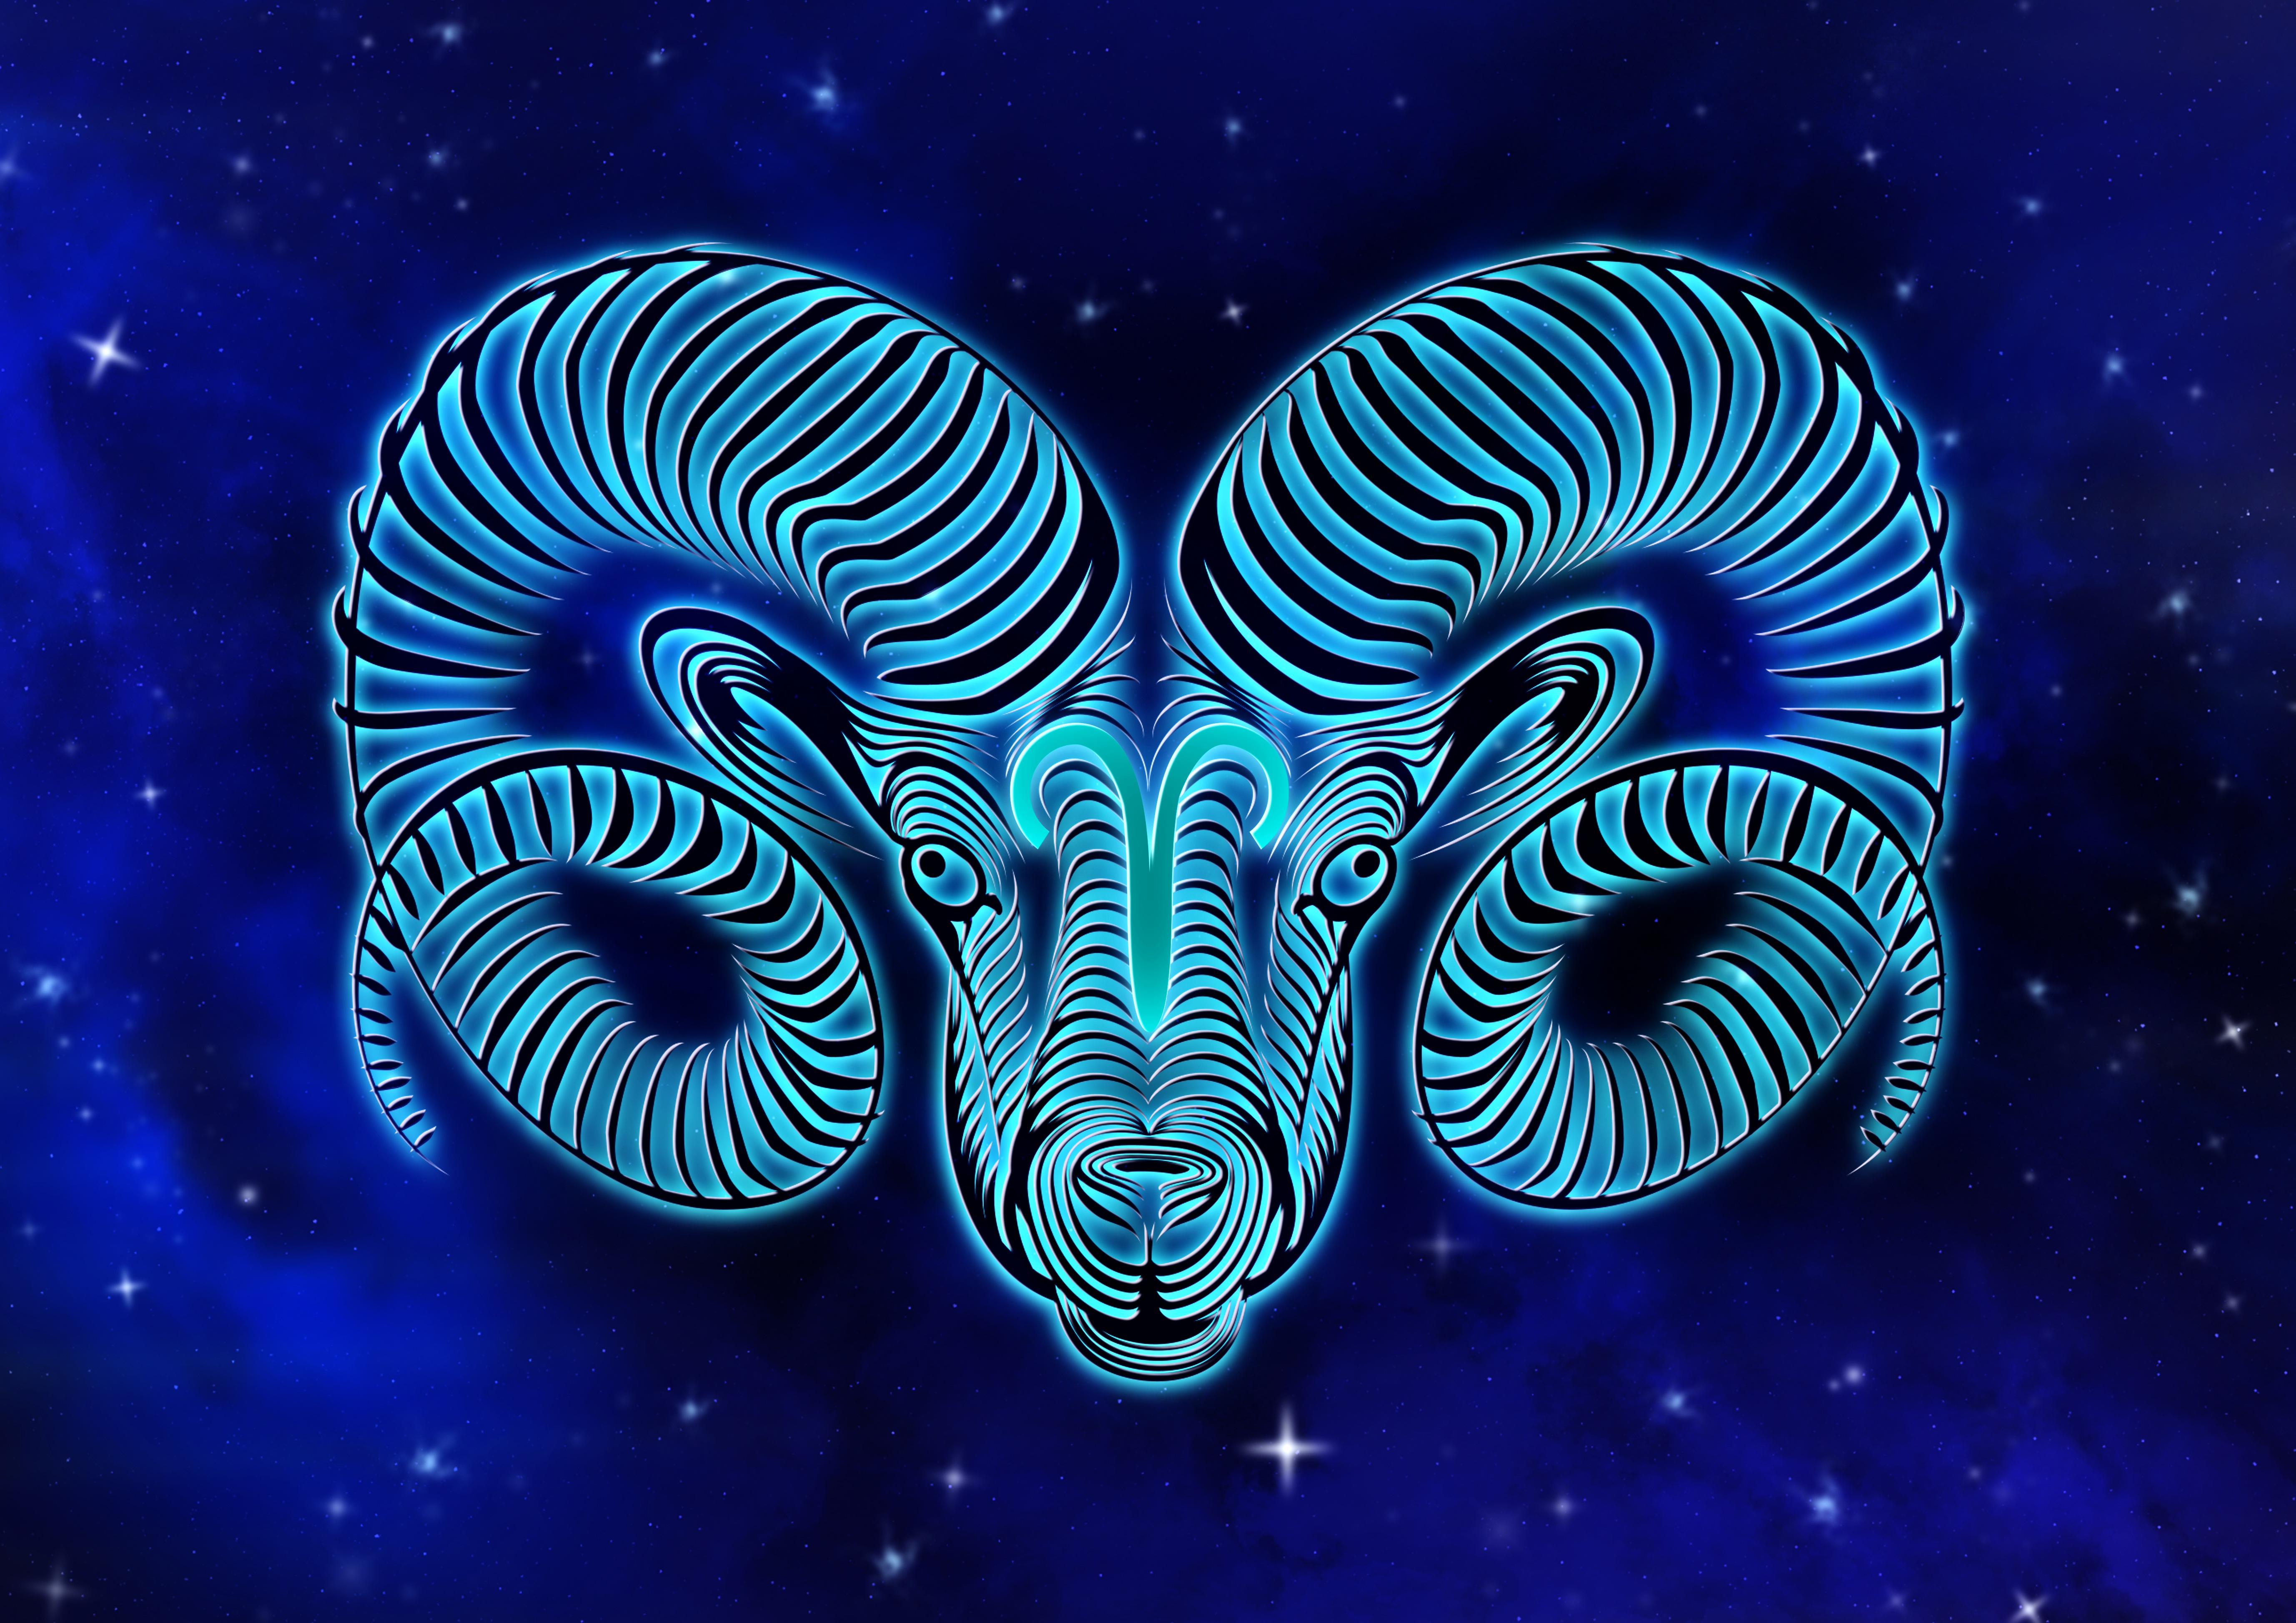 Wallpapers Aries zodiac sign horoscope on the desktop